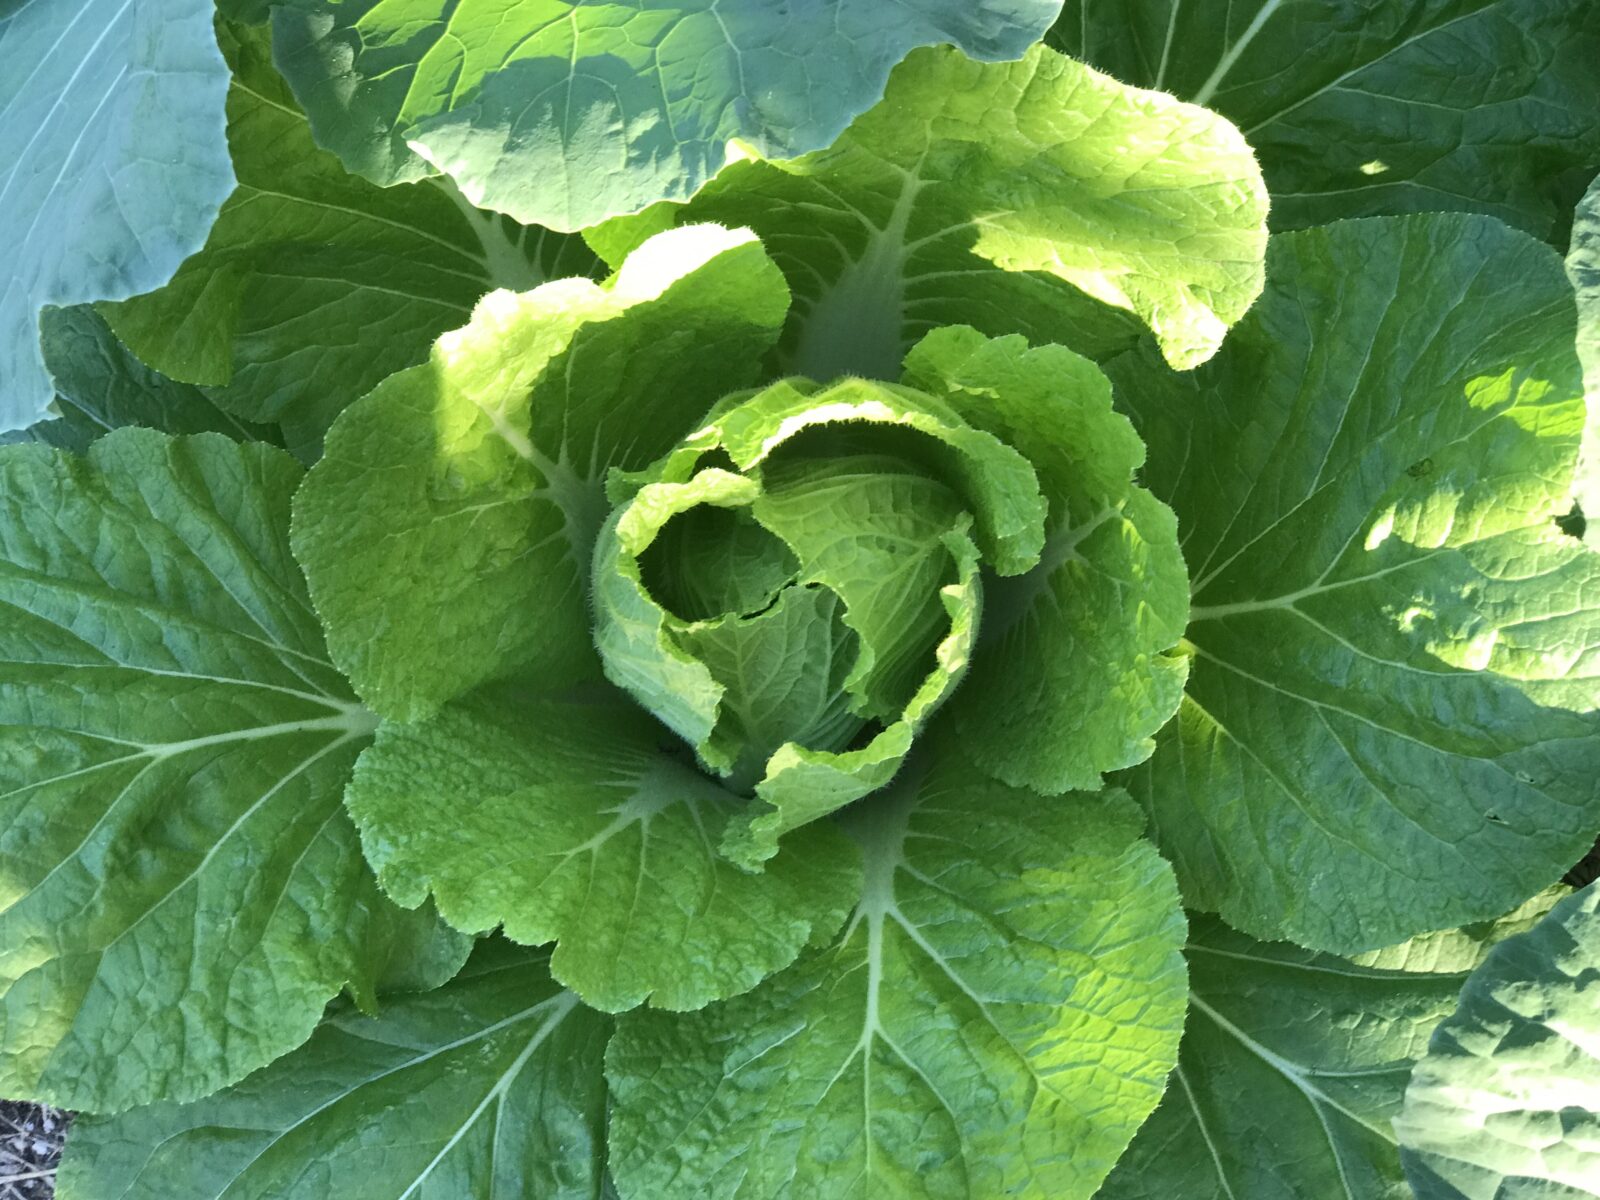 Napa Cabbage is a good choice to plant in January for Florida Gardeners